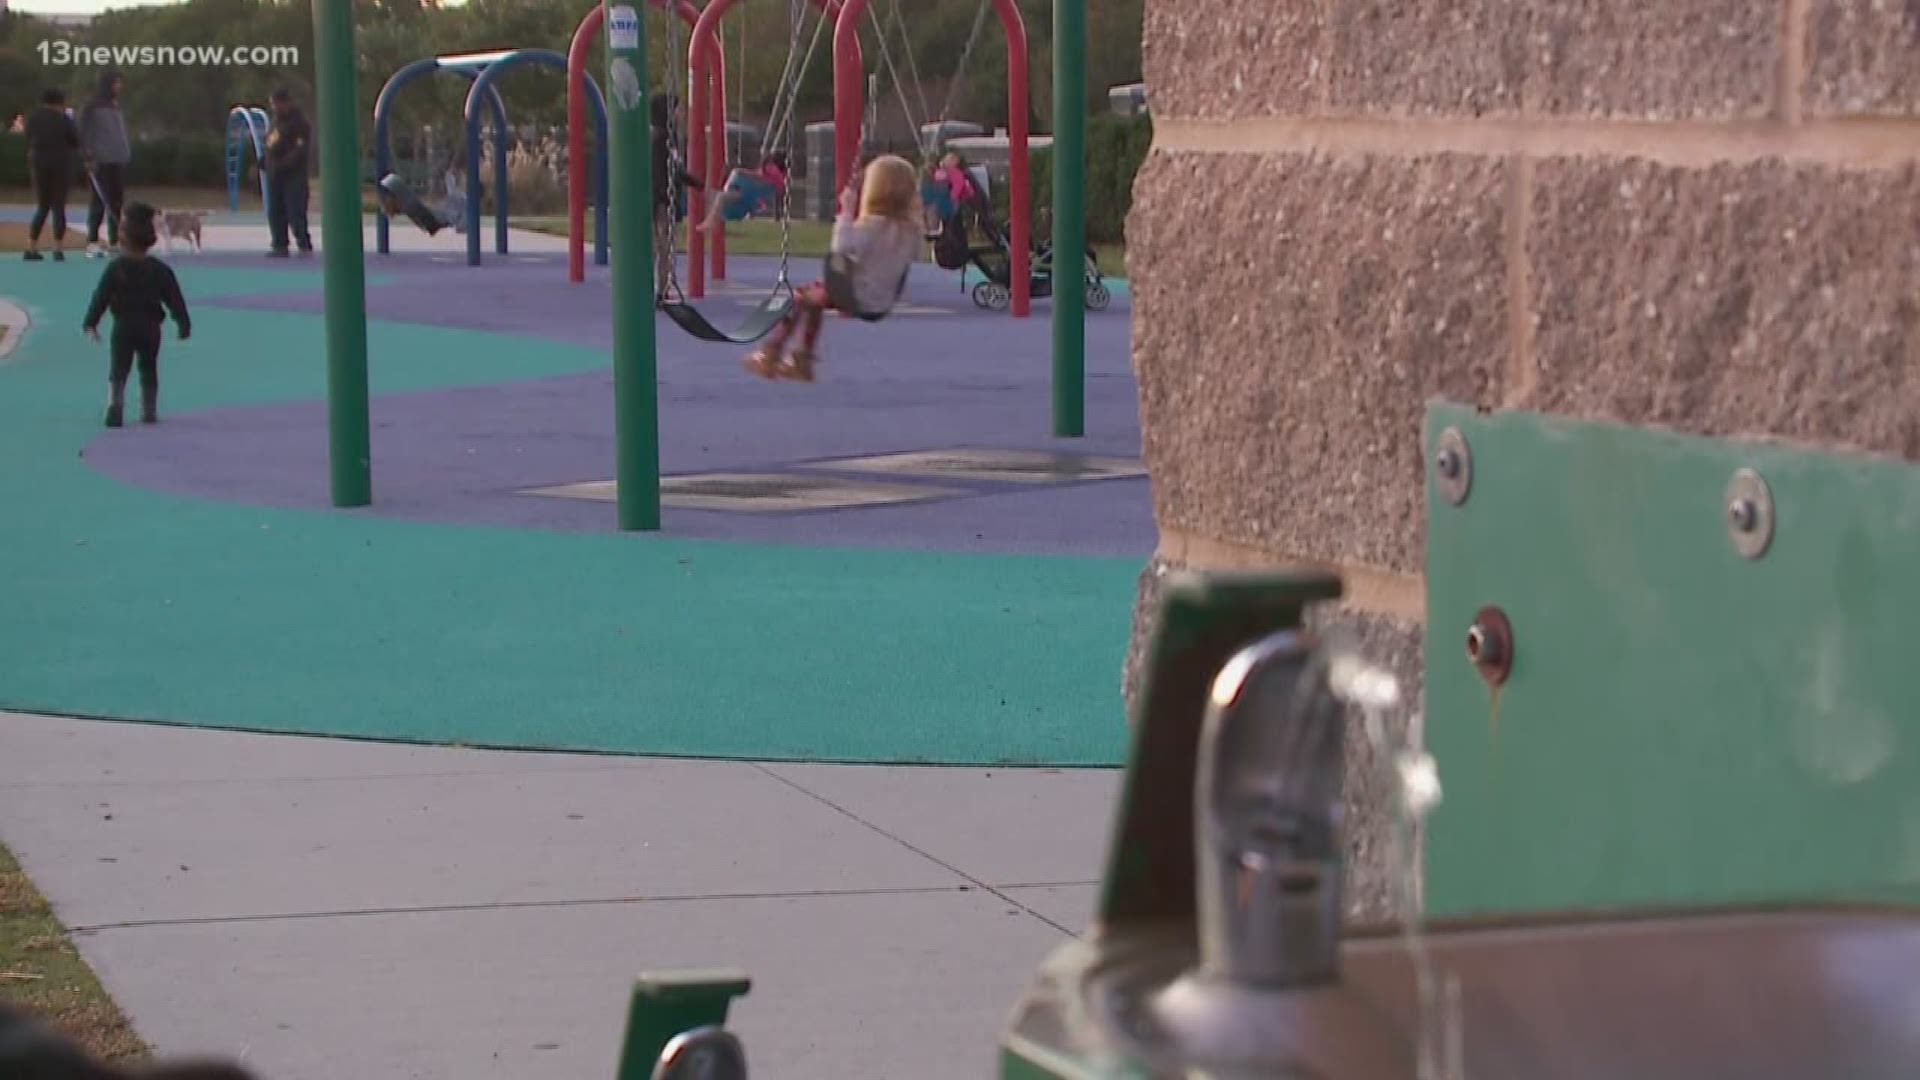 Norfolk and Suffolk schools released their lead-level test results. A Norfolk elementary school fountain was 40 times the safe limit. That fountain was disconnected.